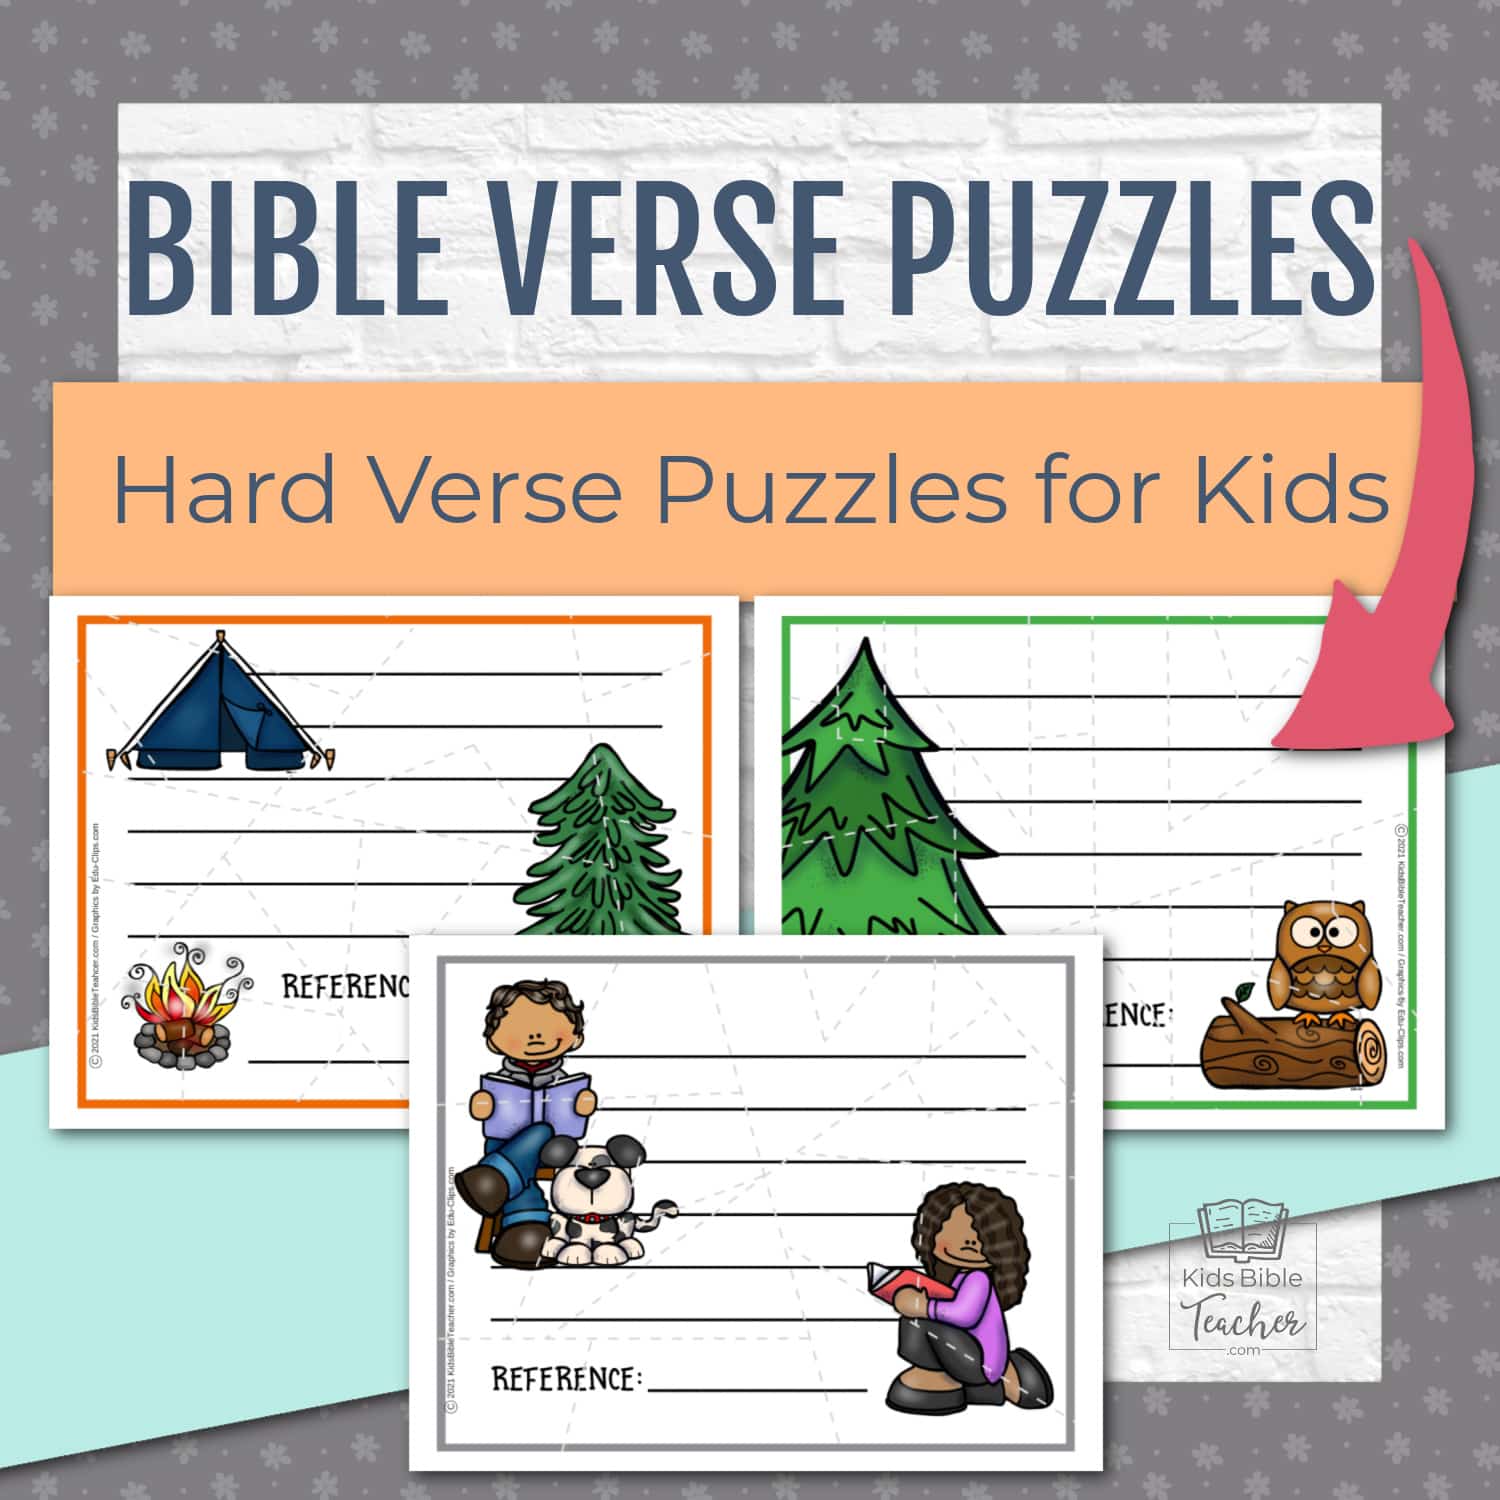 Bible Verse Puzzles for Older Kids image of 3 puzzles in full color